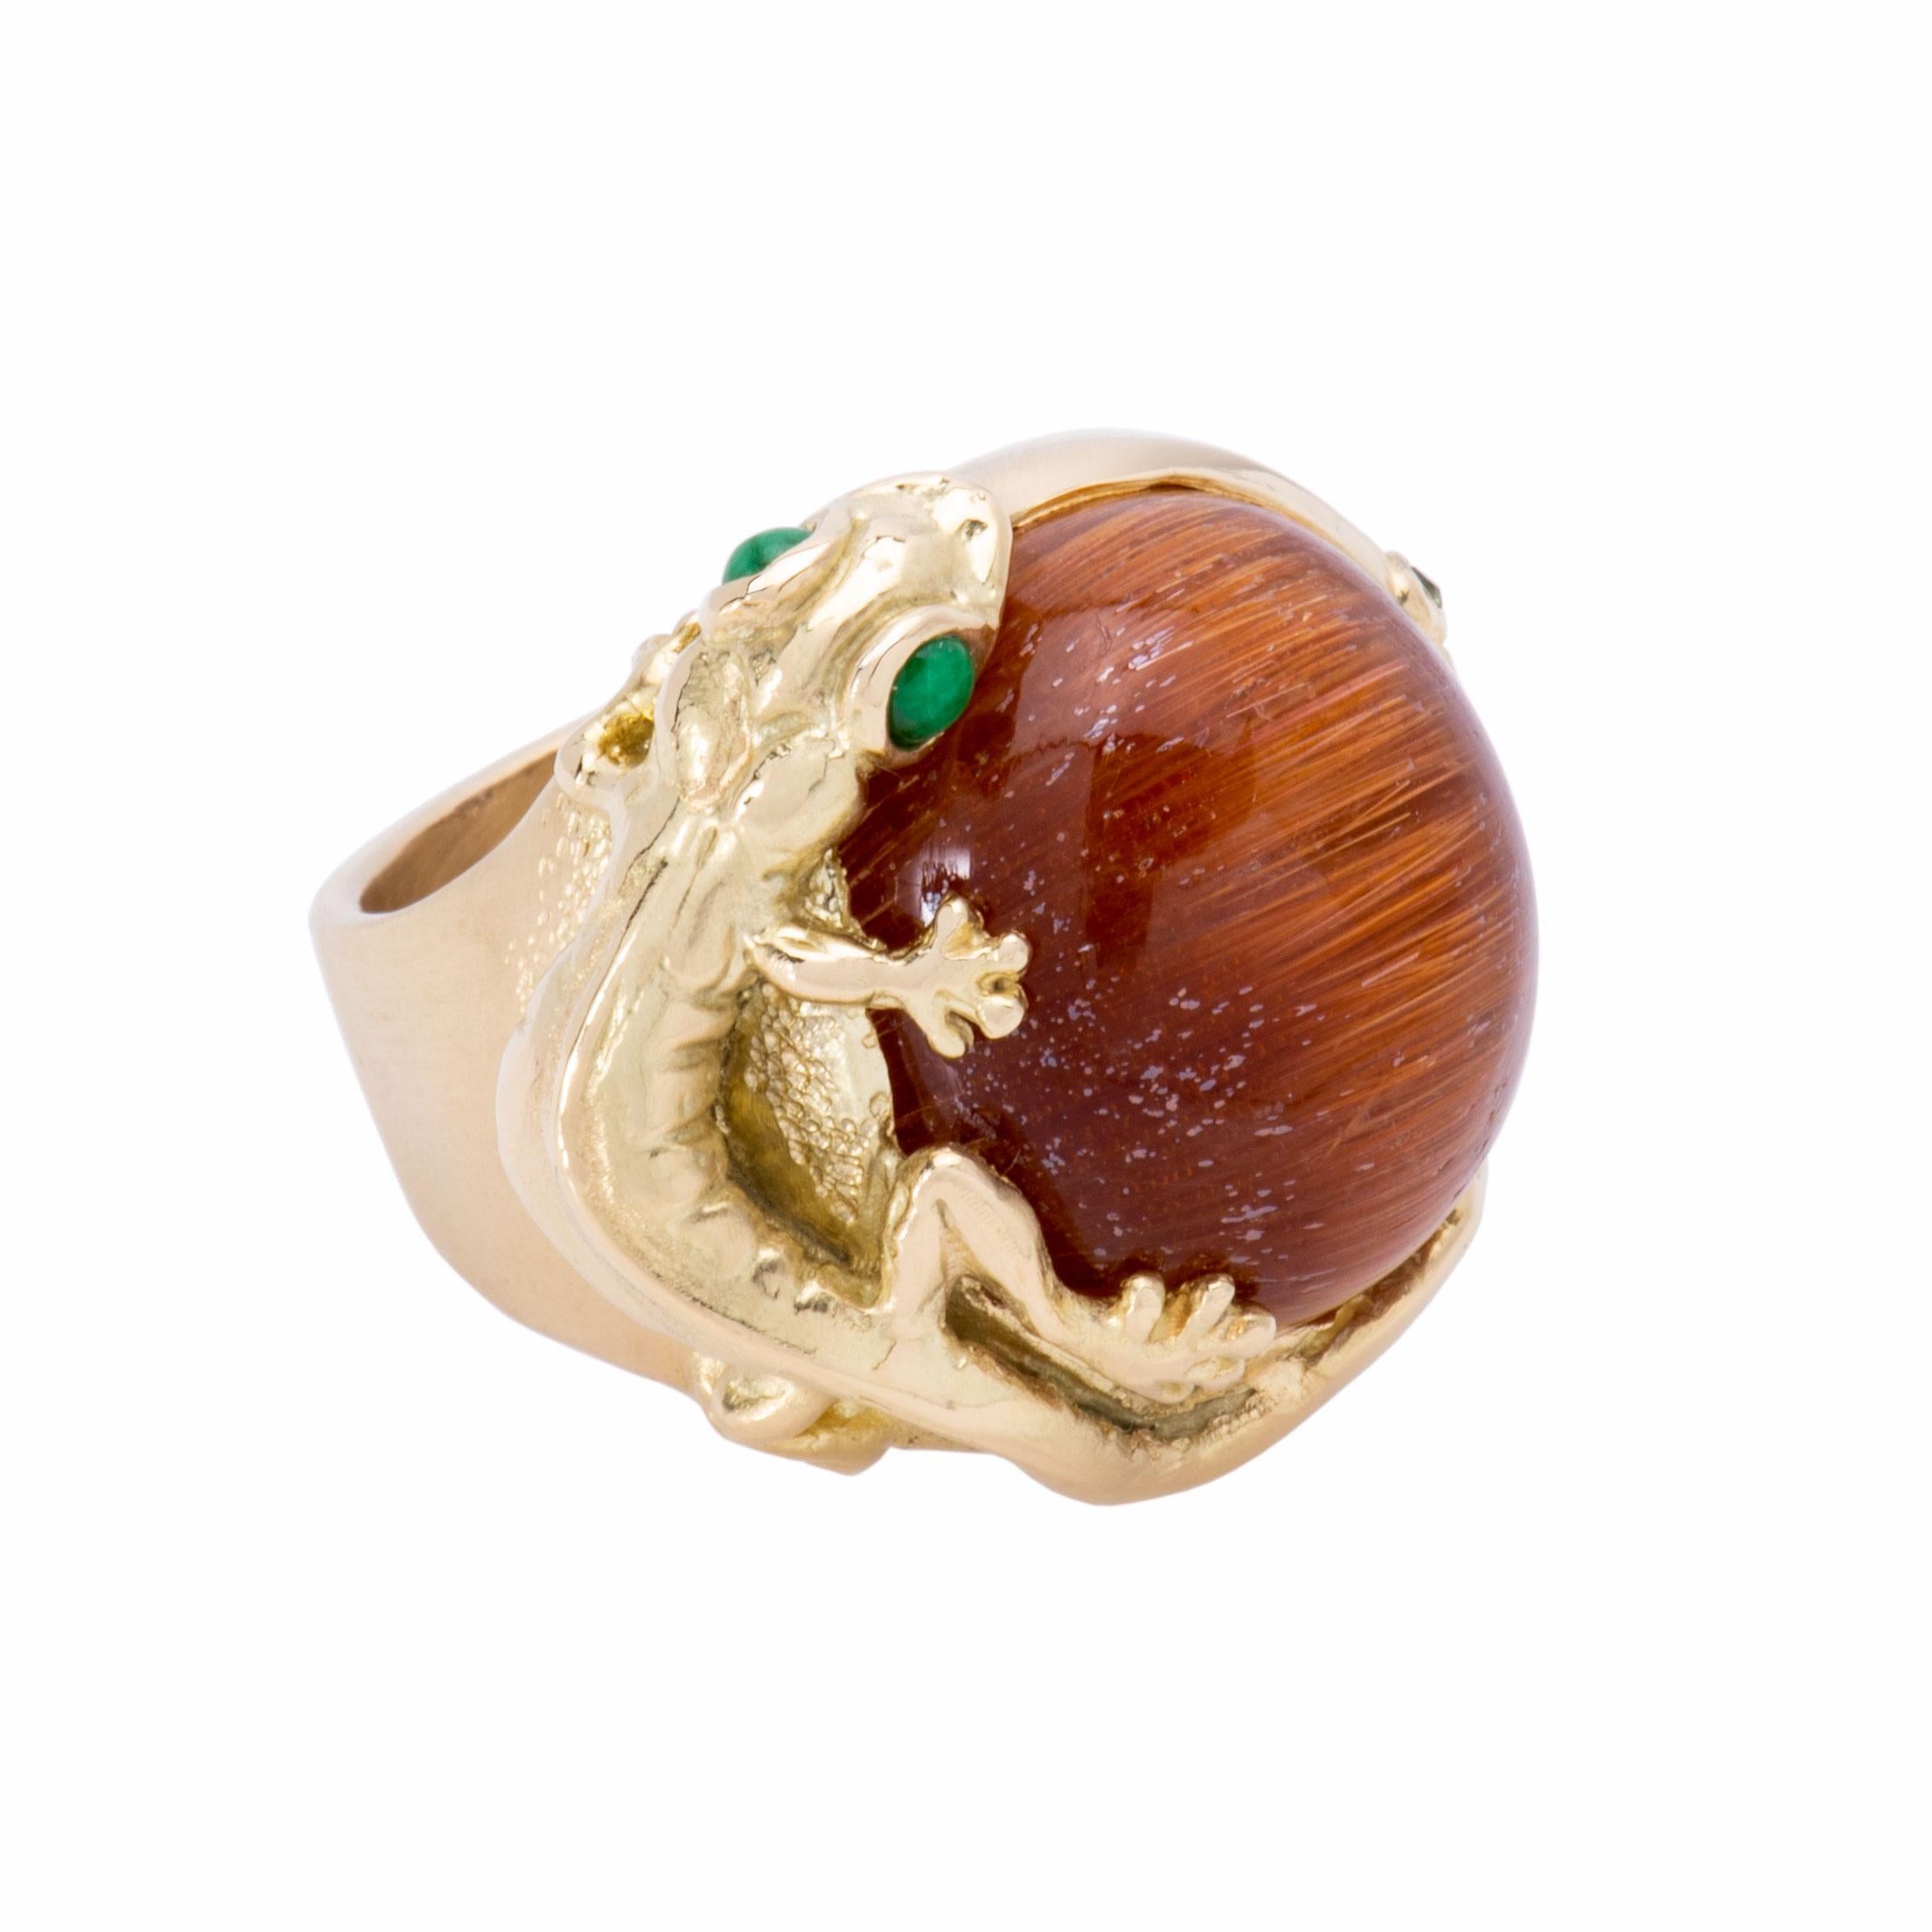 The little salamander with jade eyes wraps herself around this gorgeous 21ct rutilated quartz ring. She reaches for single peridot on the far side. Handcrafted in 18k gold, this dome ring is currently a size 7.5. Total weight of the Salamander